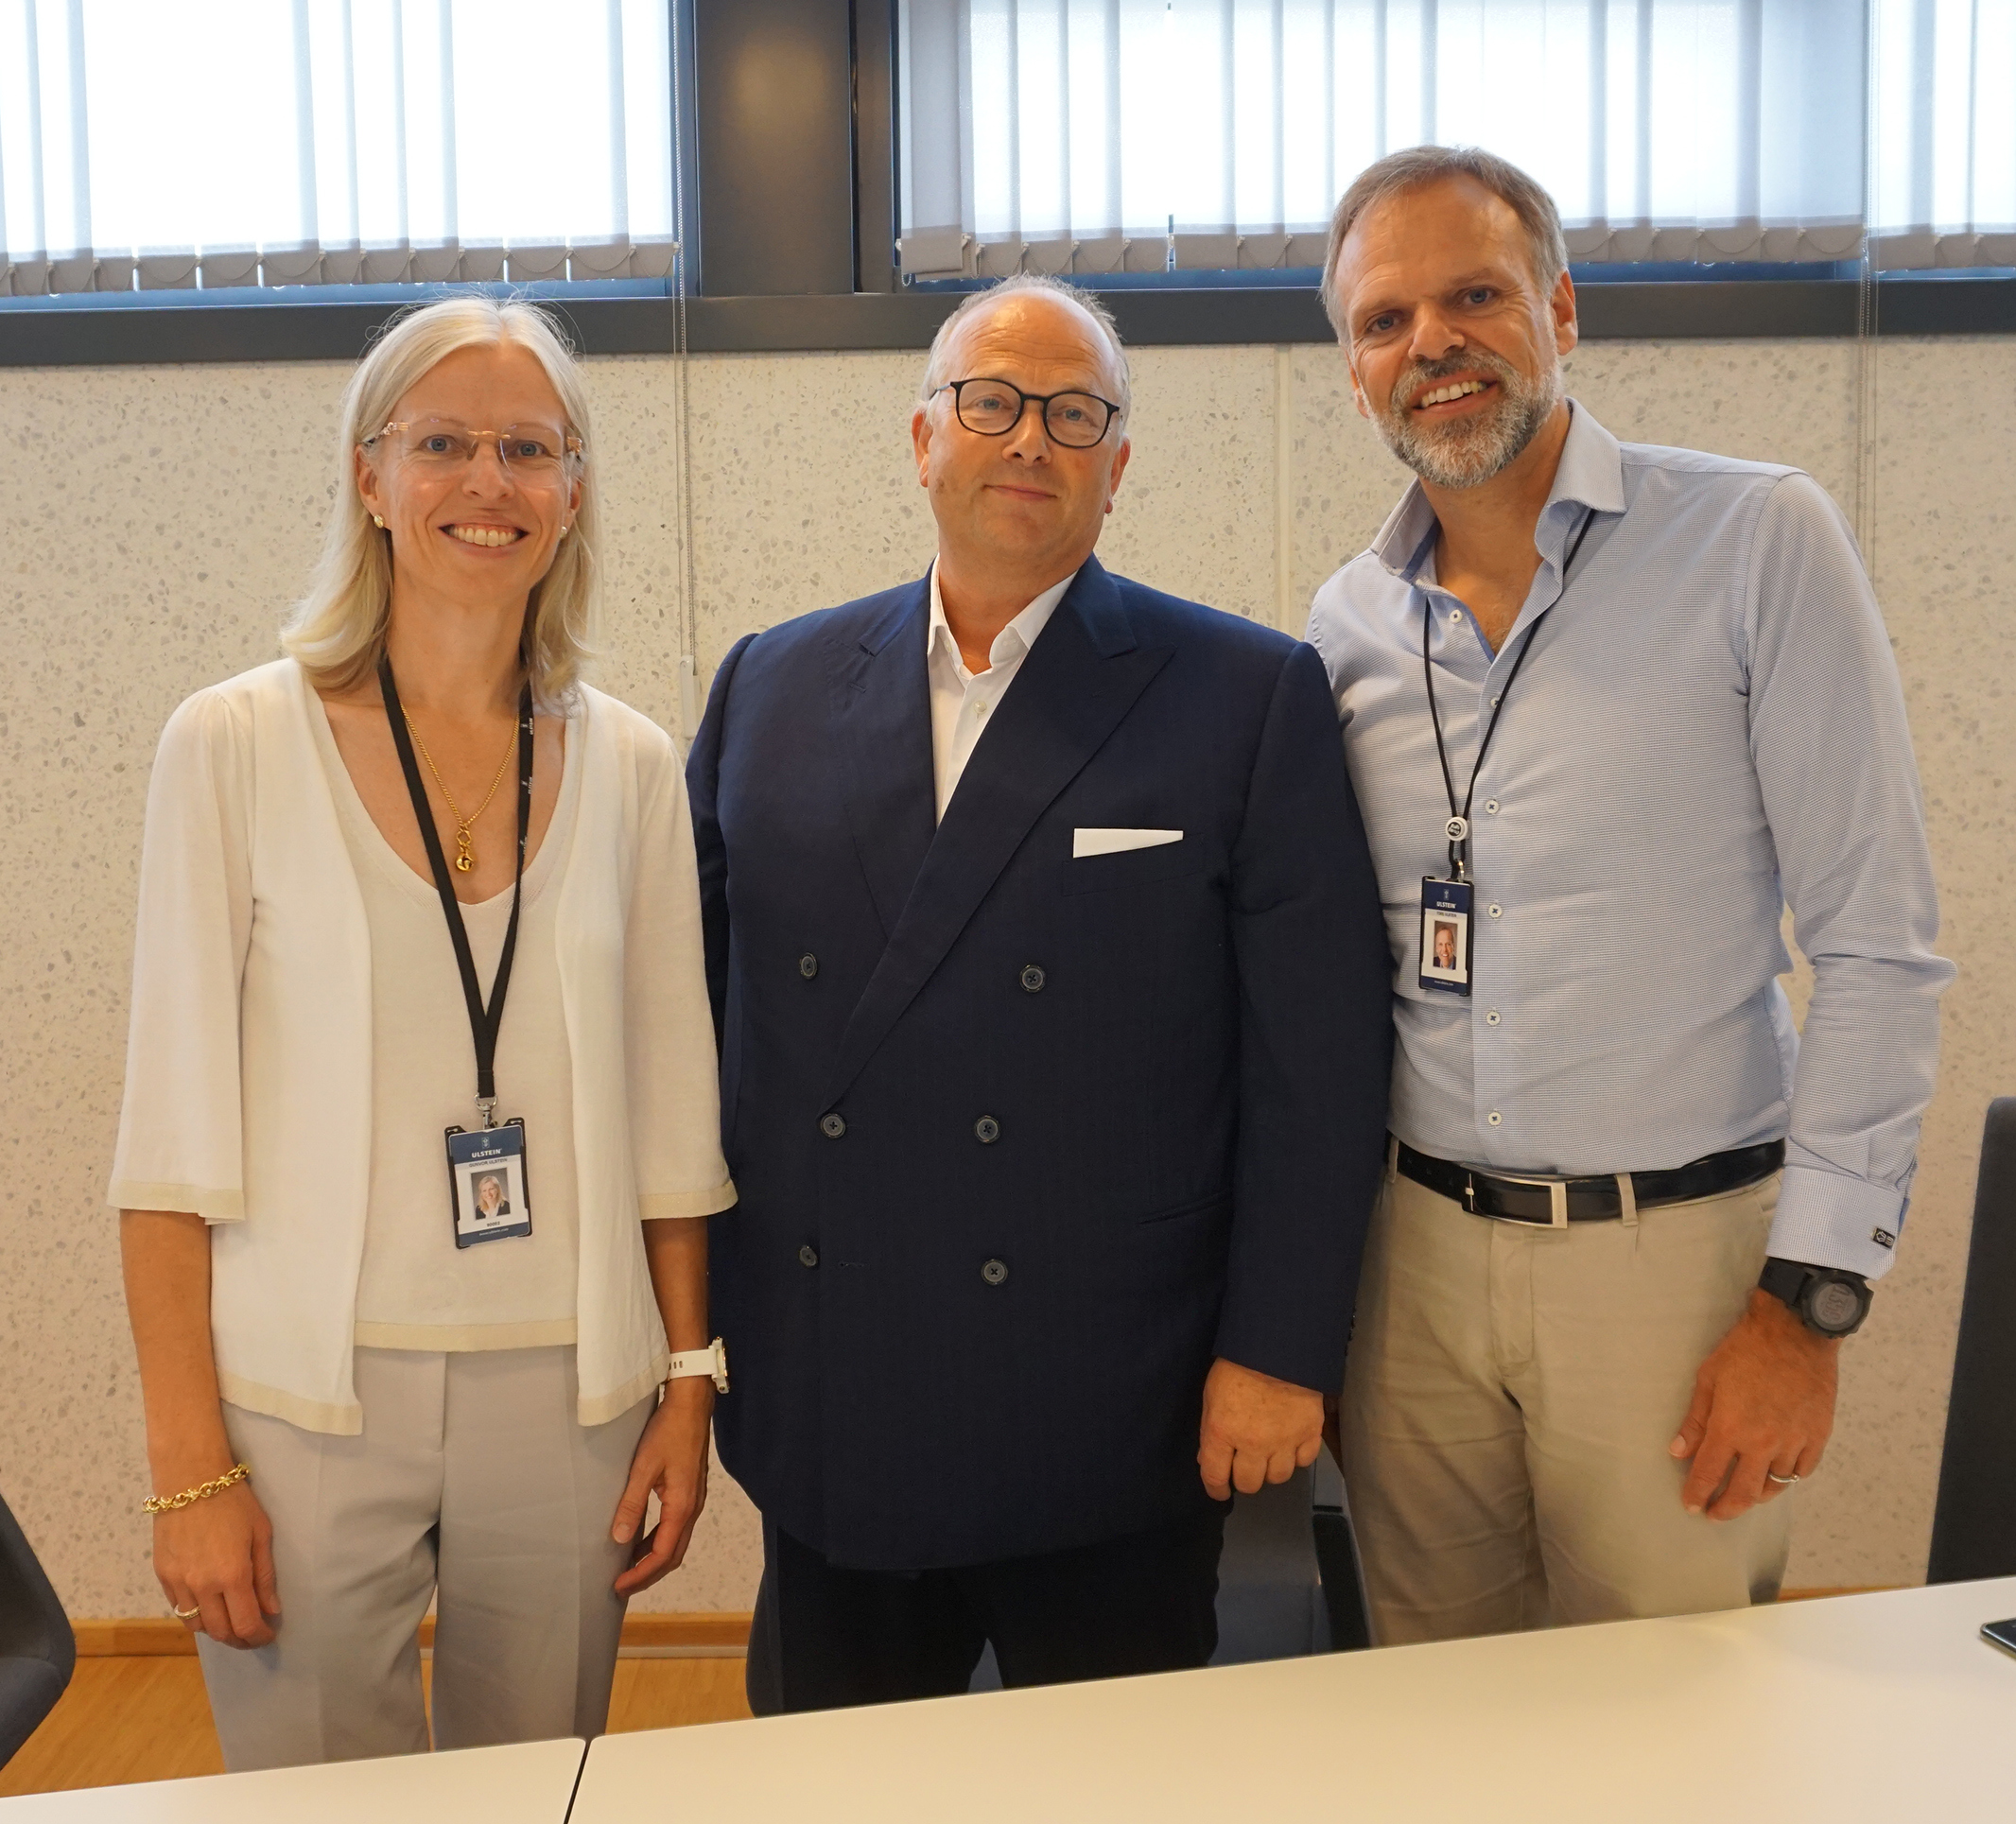 From left: Gunvor Ulstein - CEO Ulstein Group, Trond Kleivdal - CEO Color Line, and Tore Ulstein - deputy CEO Ulstein Group.